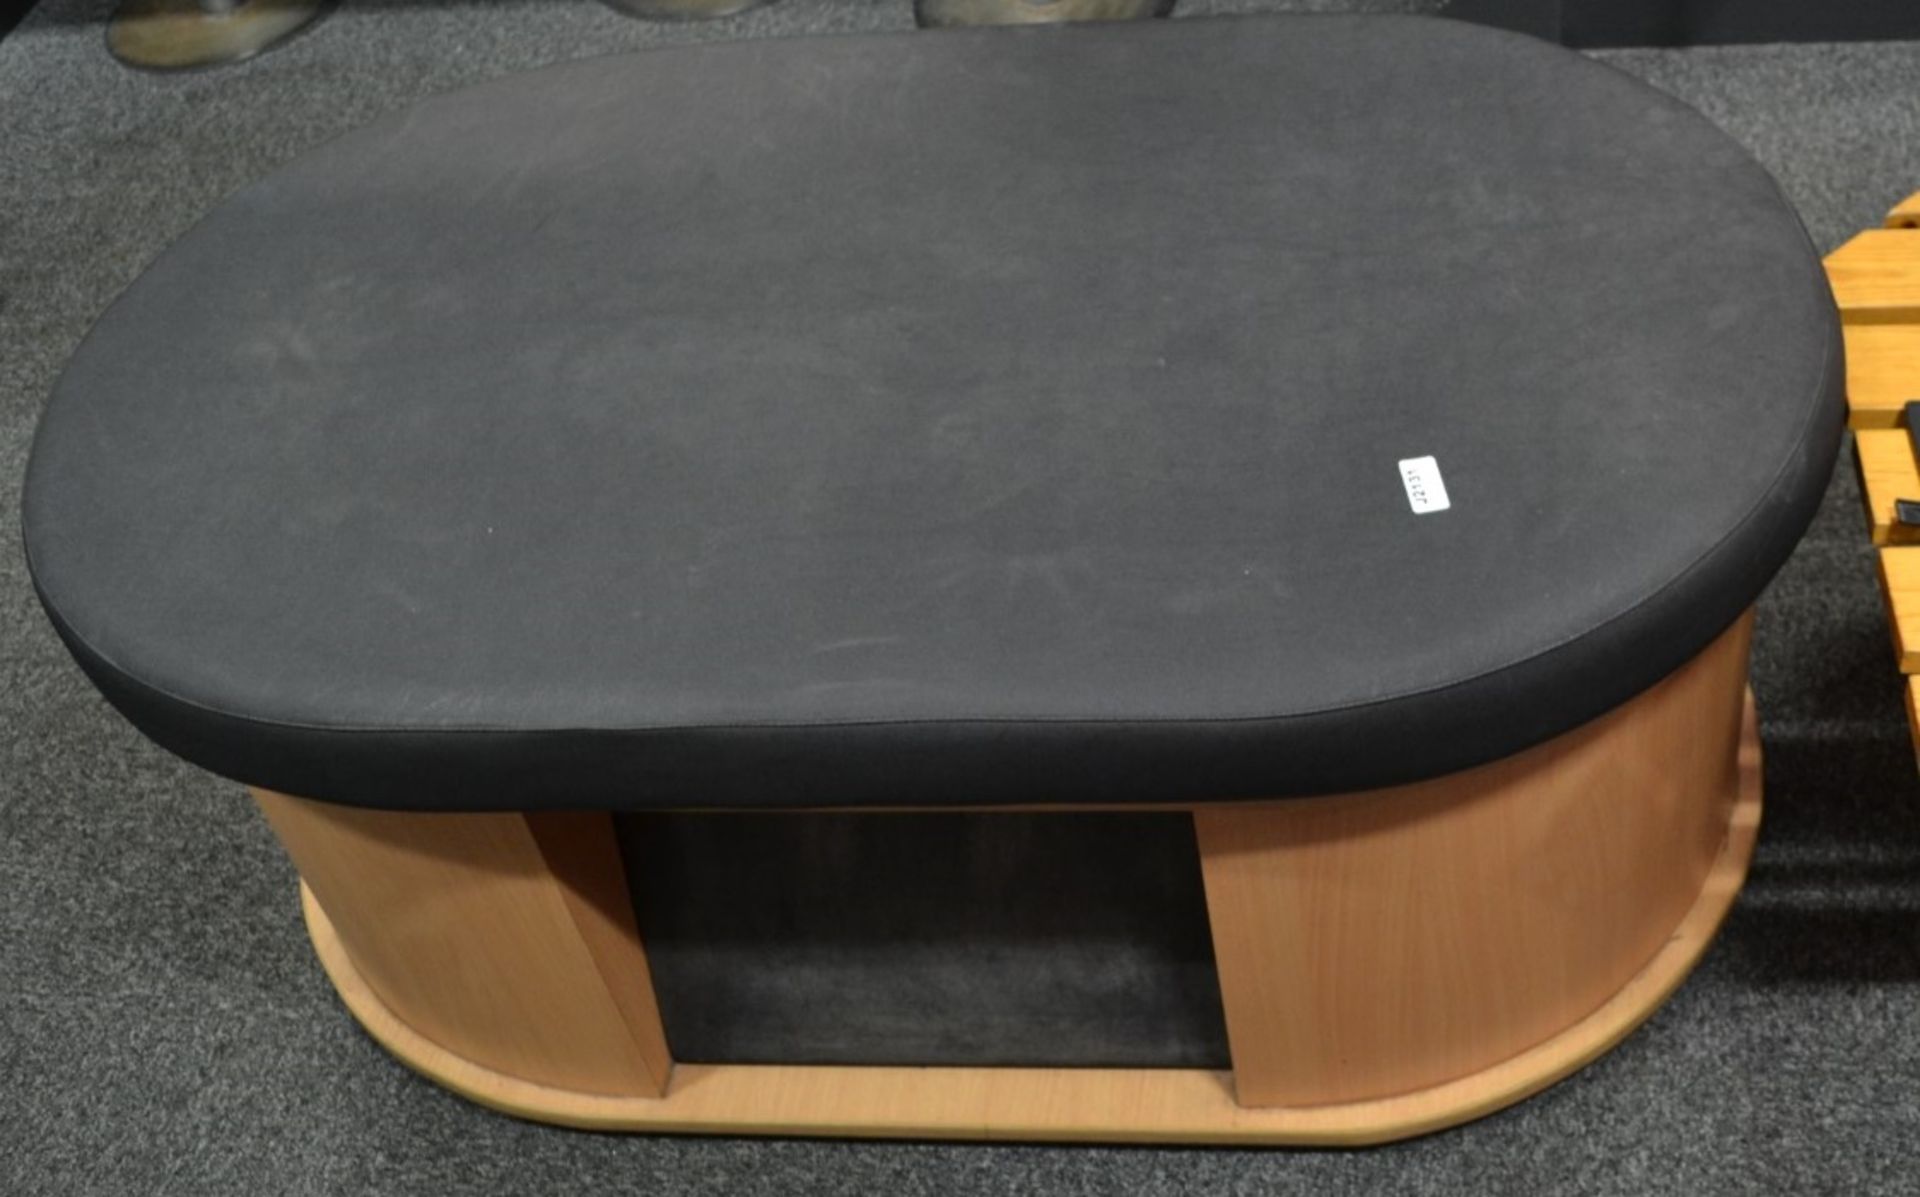 1 x Oval Changing Room Bench With Padded Top - Dimensions: L130 x W80 x H50cm - Ref: J2131/MCR -